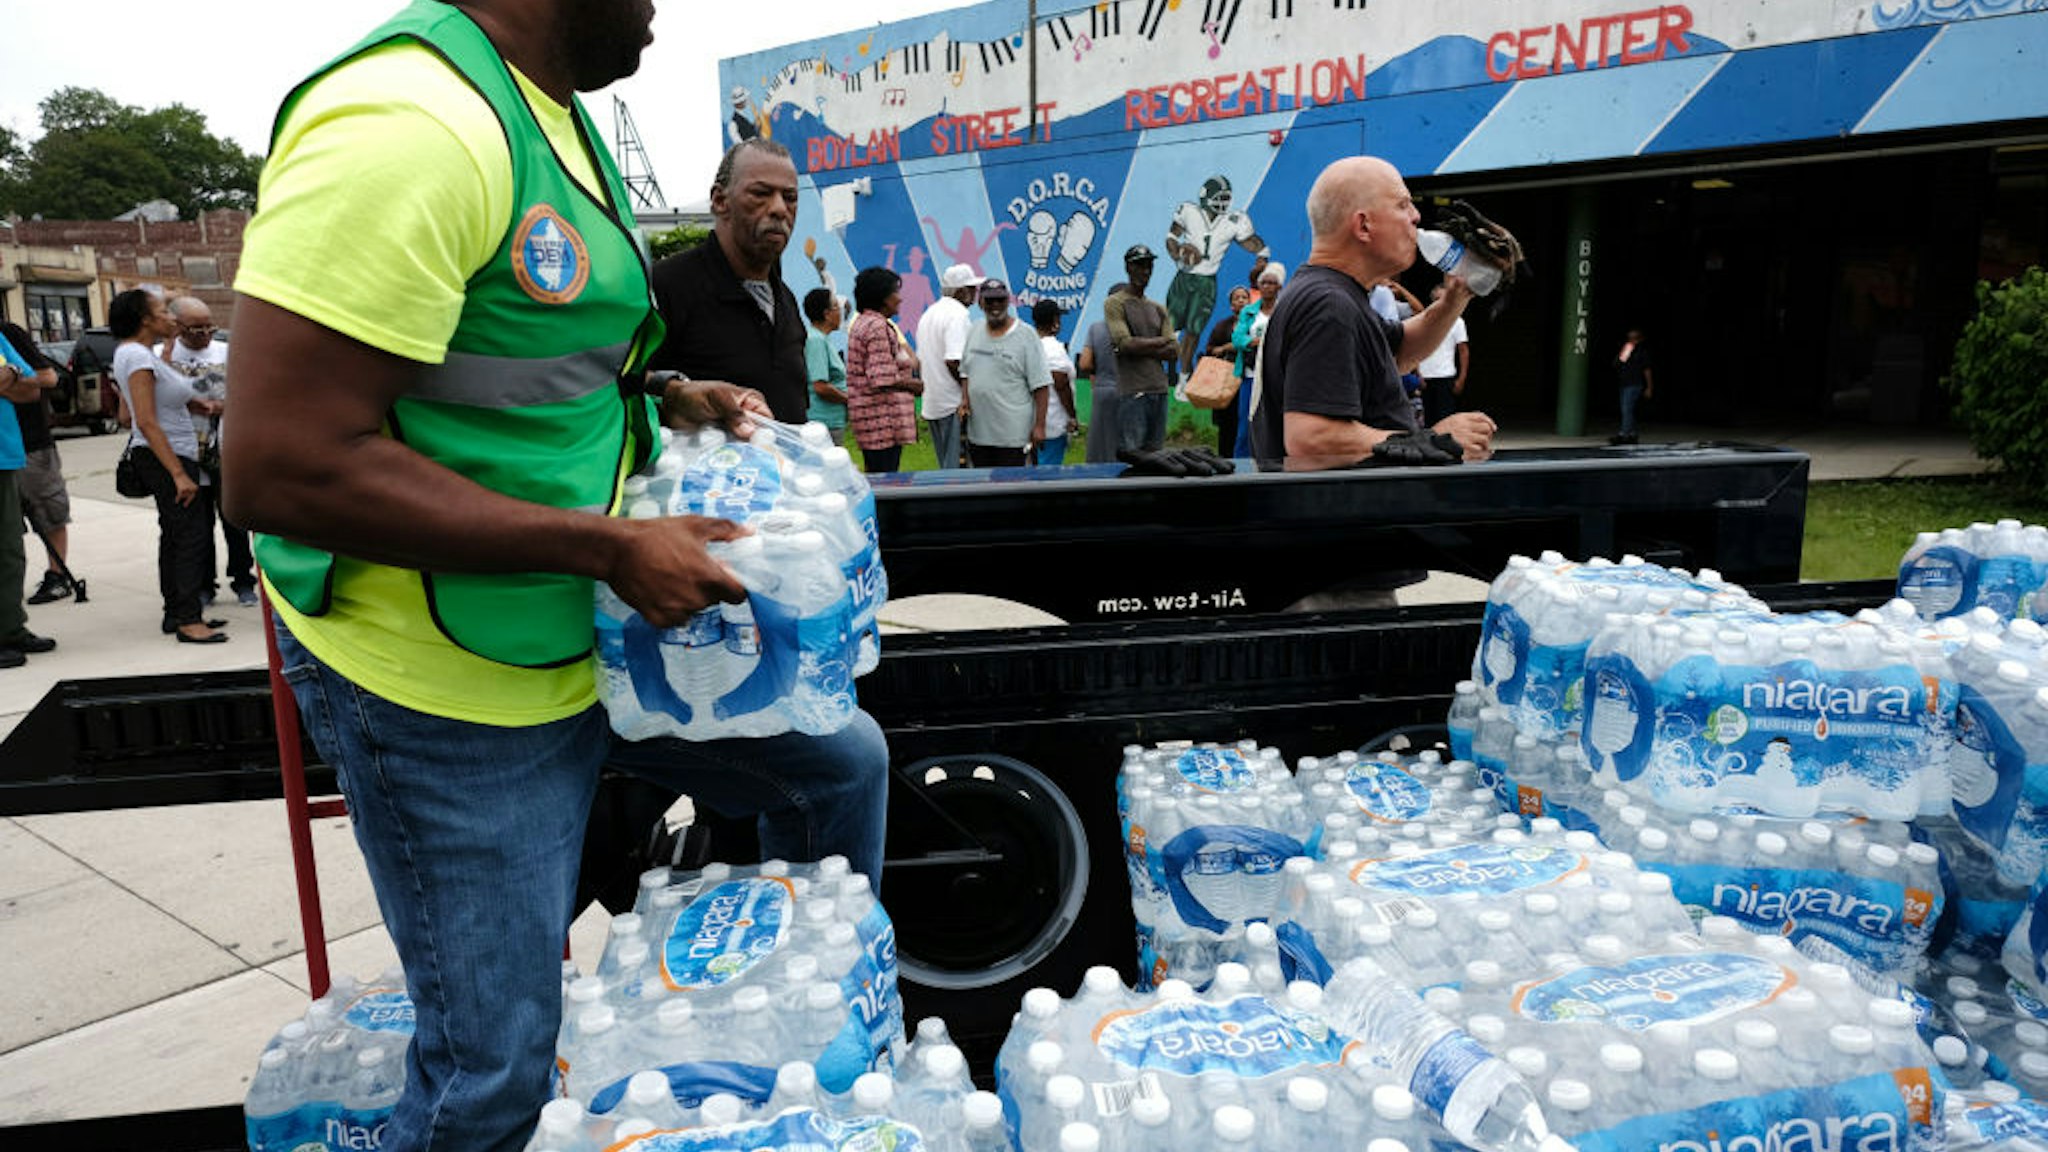 A pallet of bottled water is delivered to a recreation center on August 13, 2019 in Newark, New Jersey. Residents of Newark, the largest city in New Jersey, are to receive free water after lead was found in the tap water.